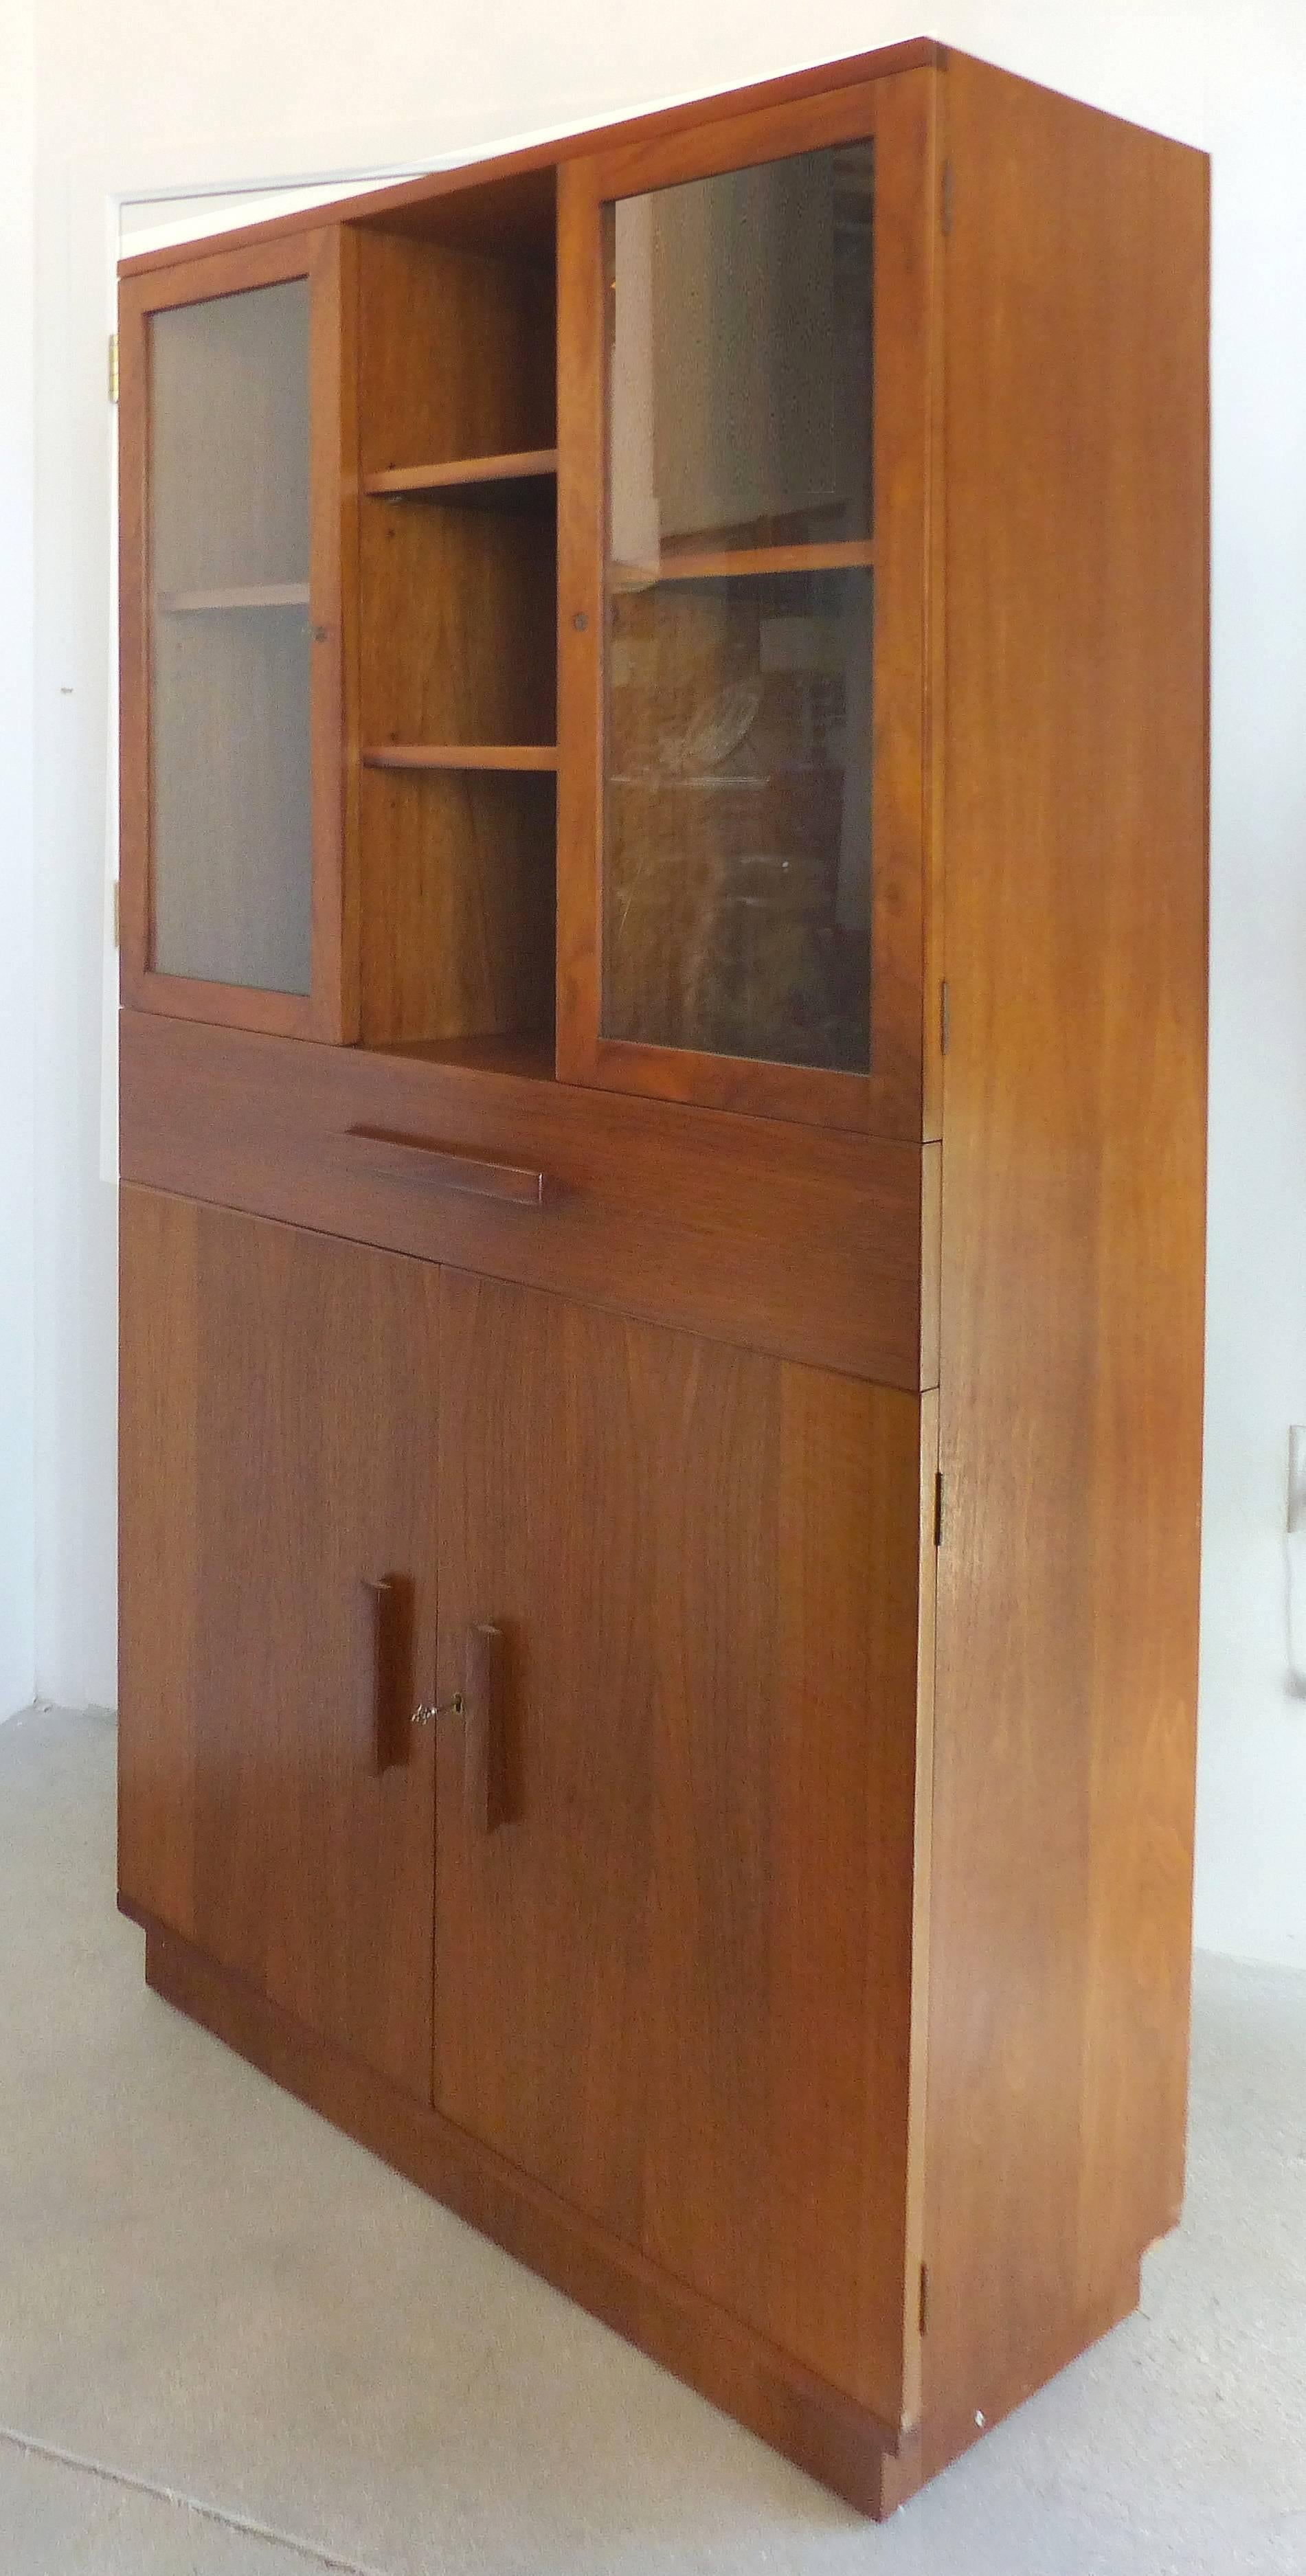 An American Art Deco bookcase vitrine cabinet manufactured and retailed by Modernage Furniture, New York, circa 1933. Created in American walnut veneers with solid walnut pulls. The cabinet has an indented foot, two doors on the bottom half open to